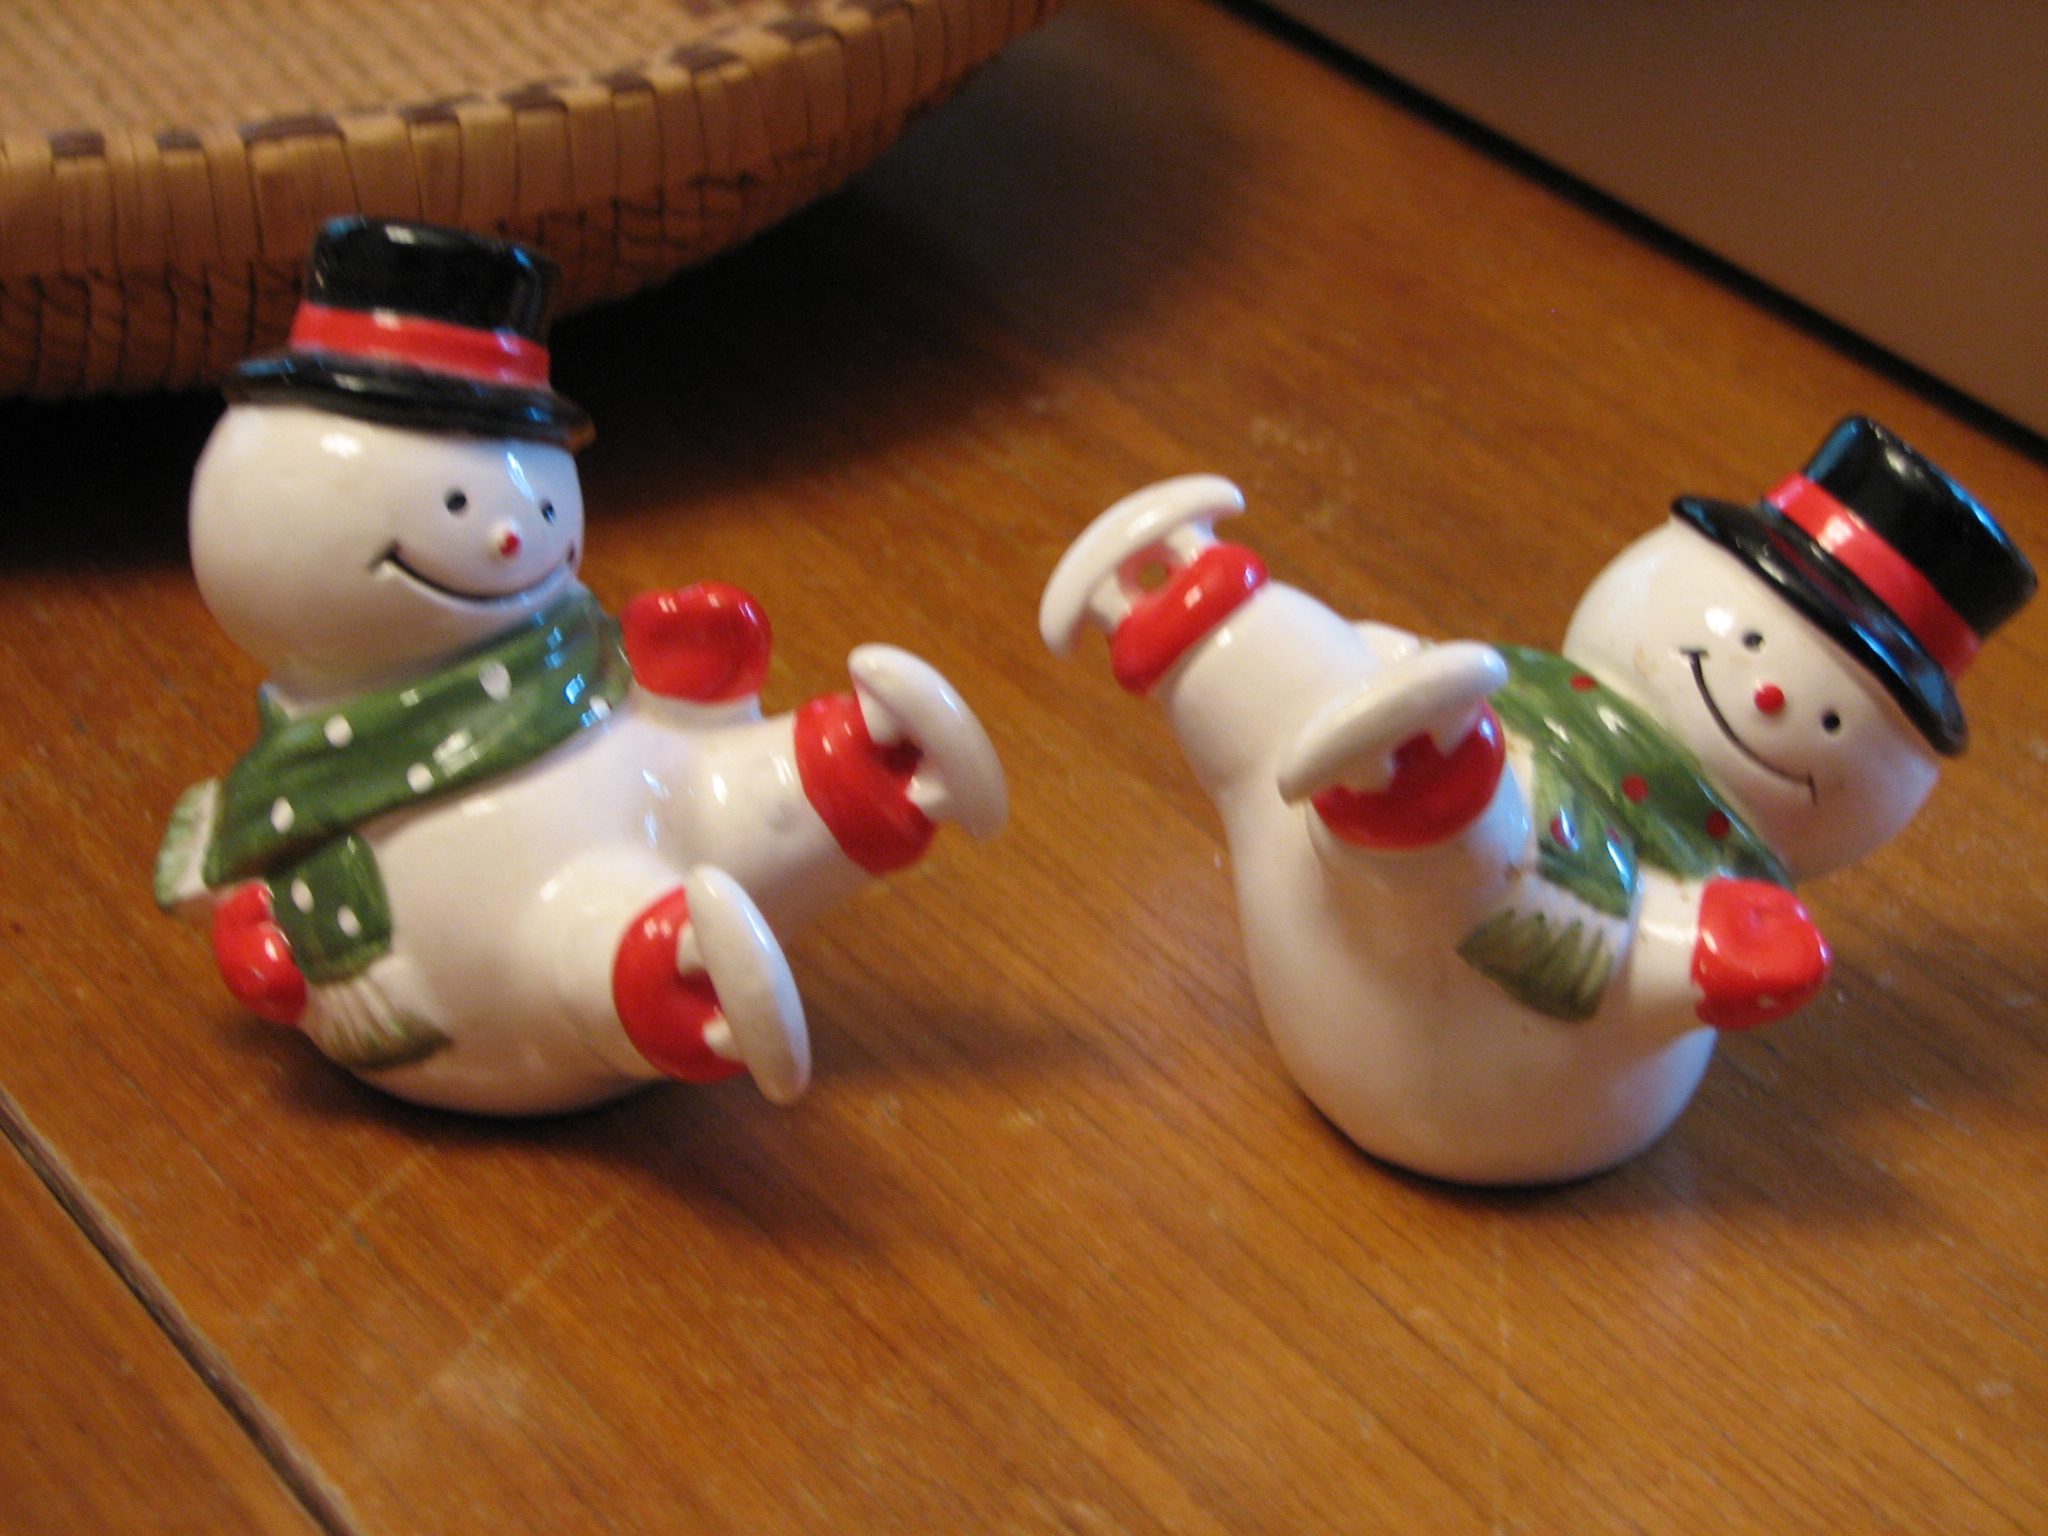 two ceramic snowman salt and pepper shakers with scarfd, hats and scarf around their necks